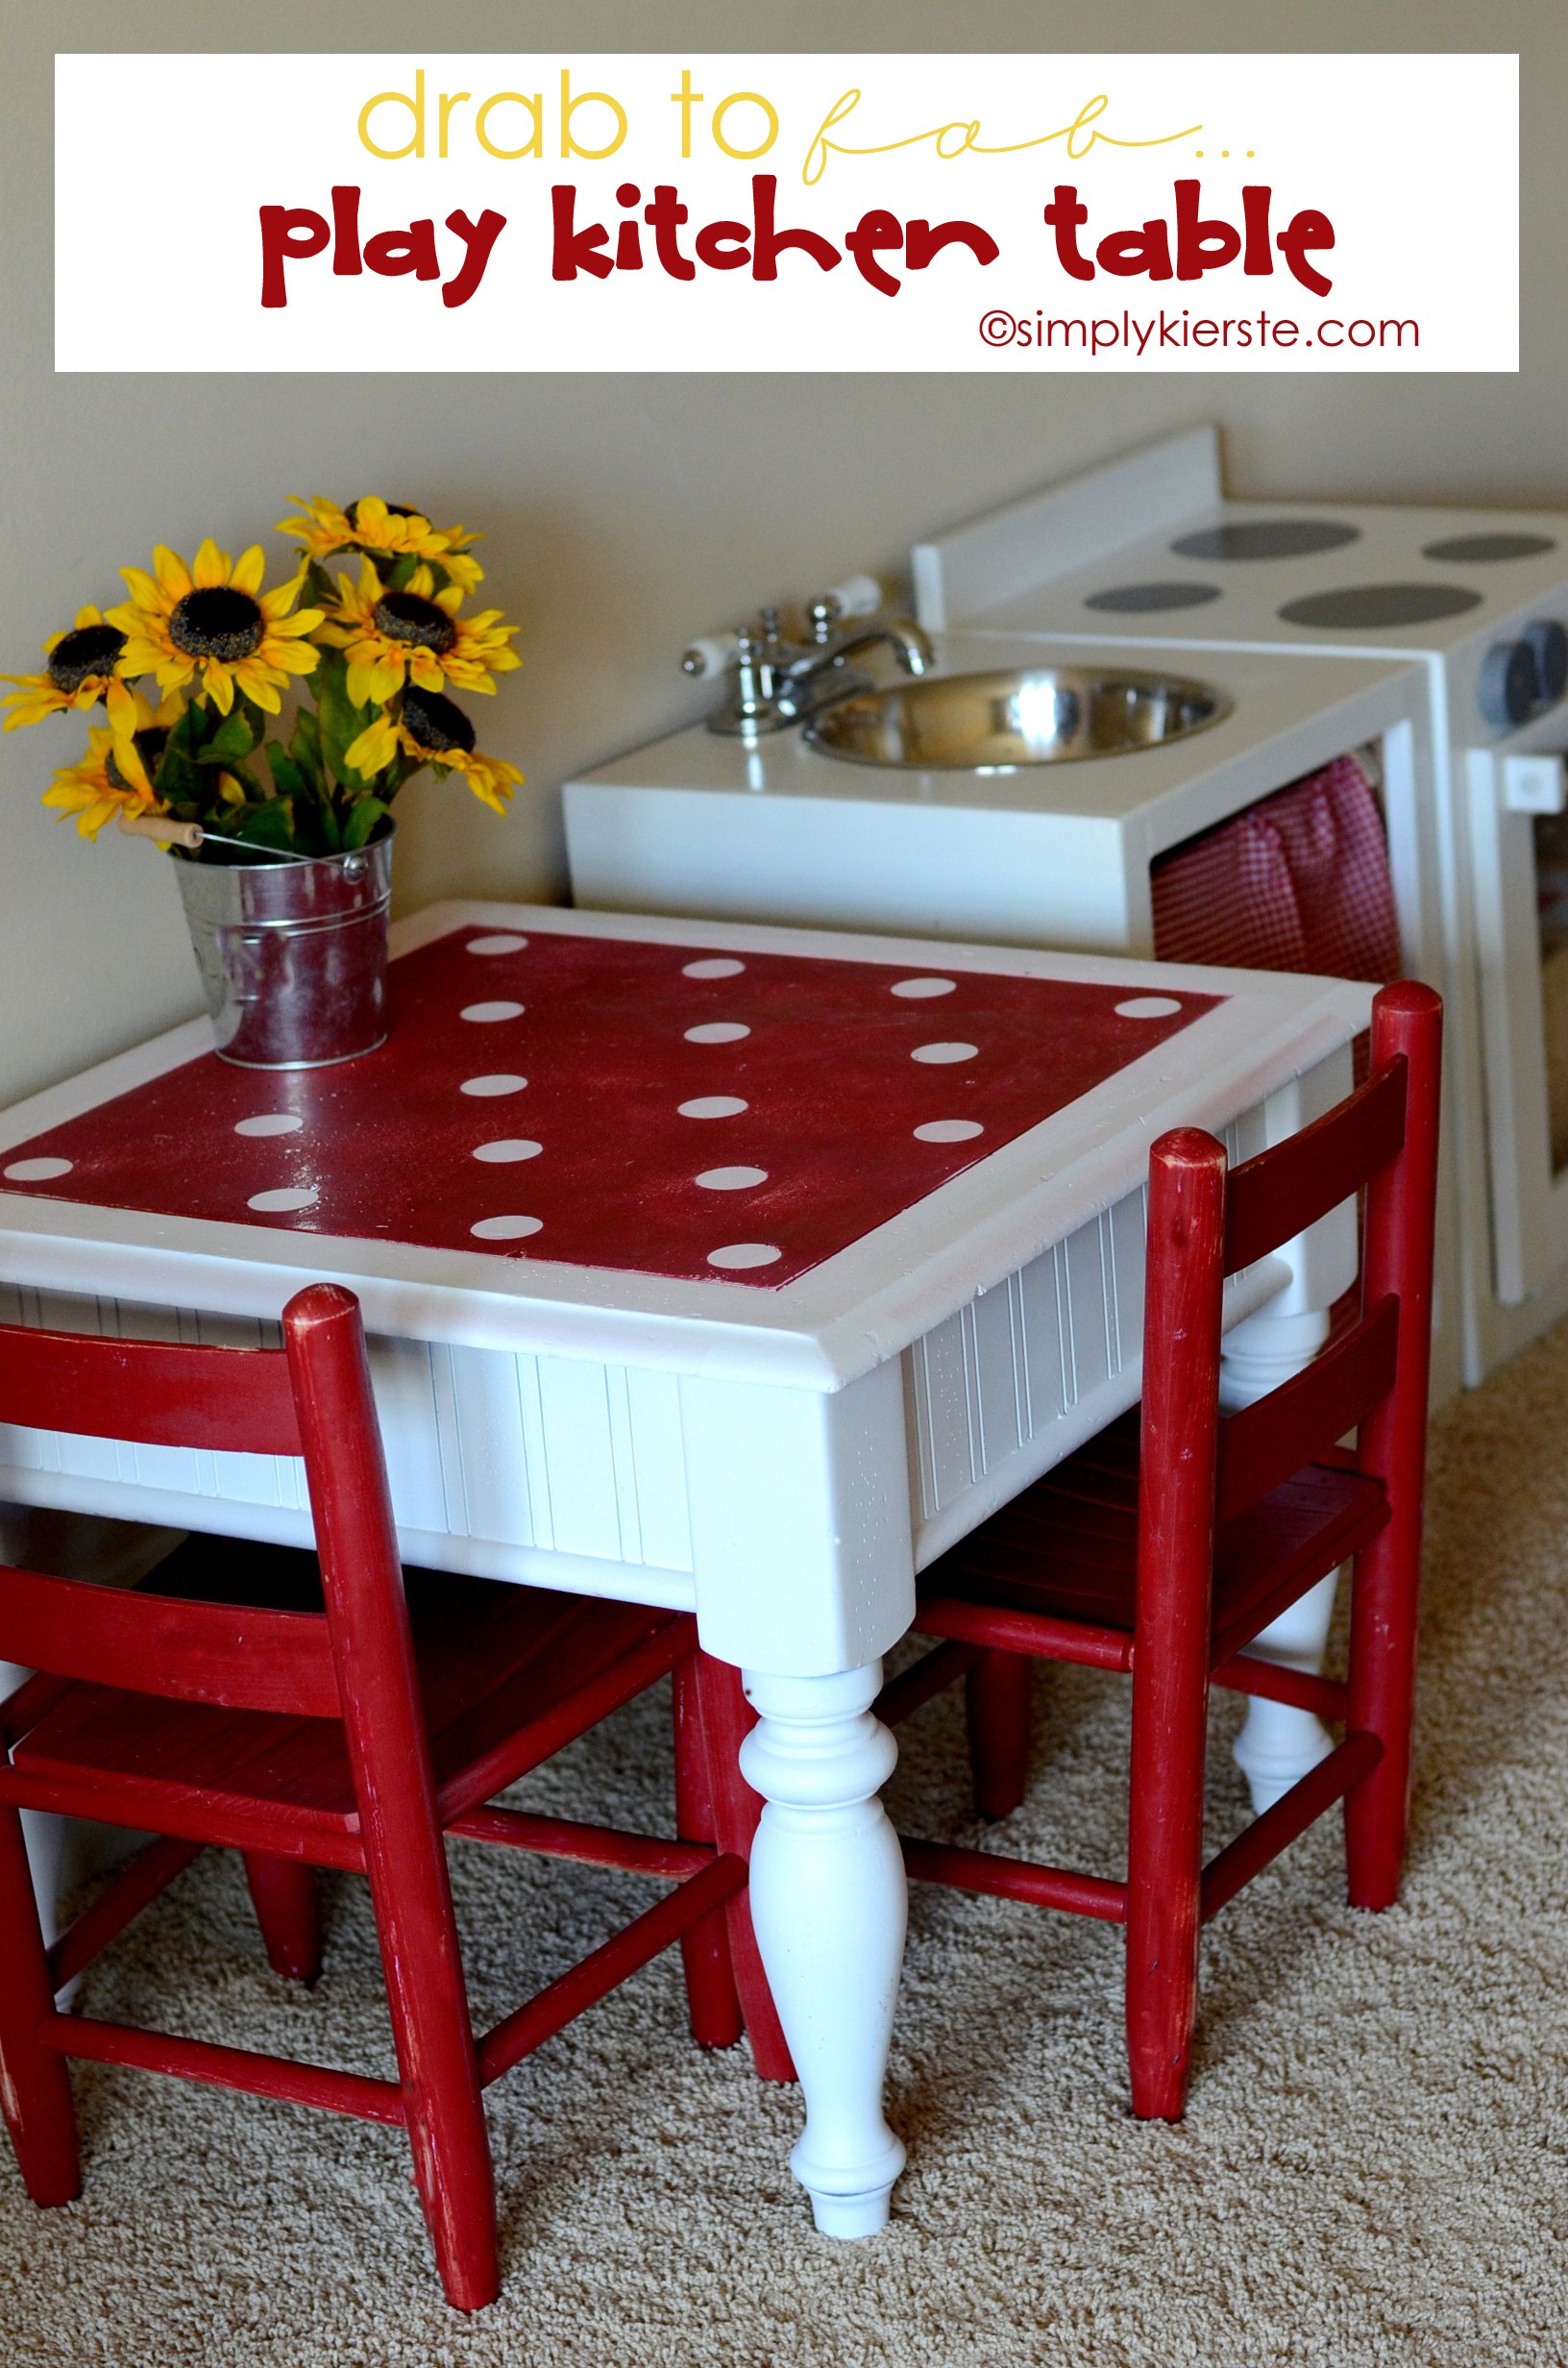 Drab to fab play kitchen table!